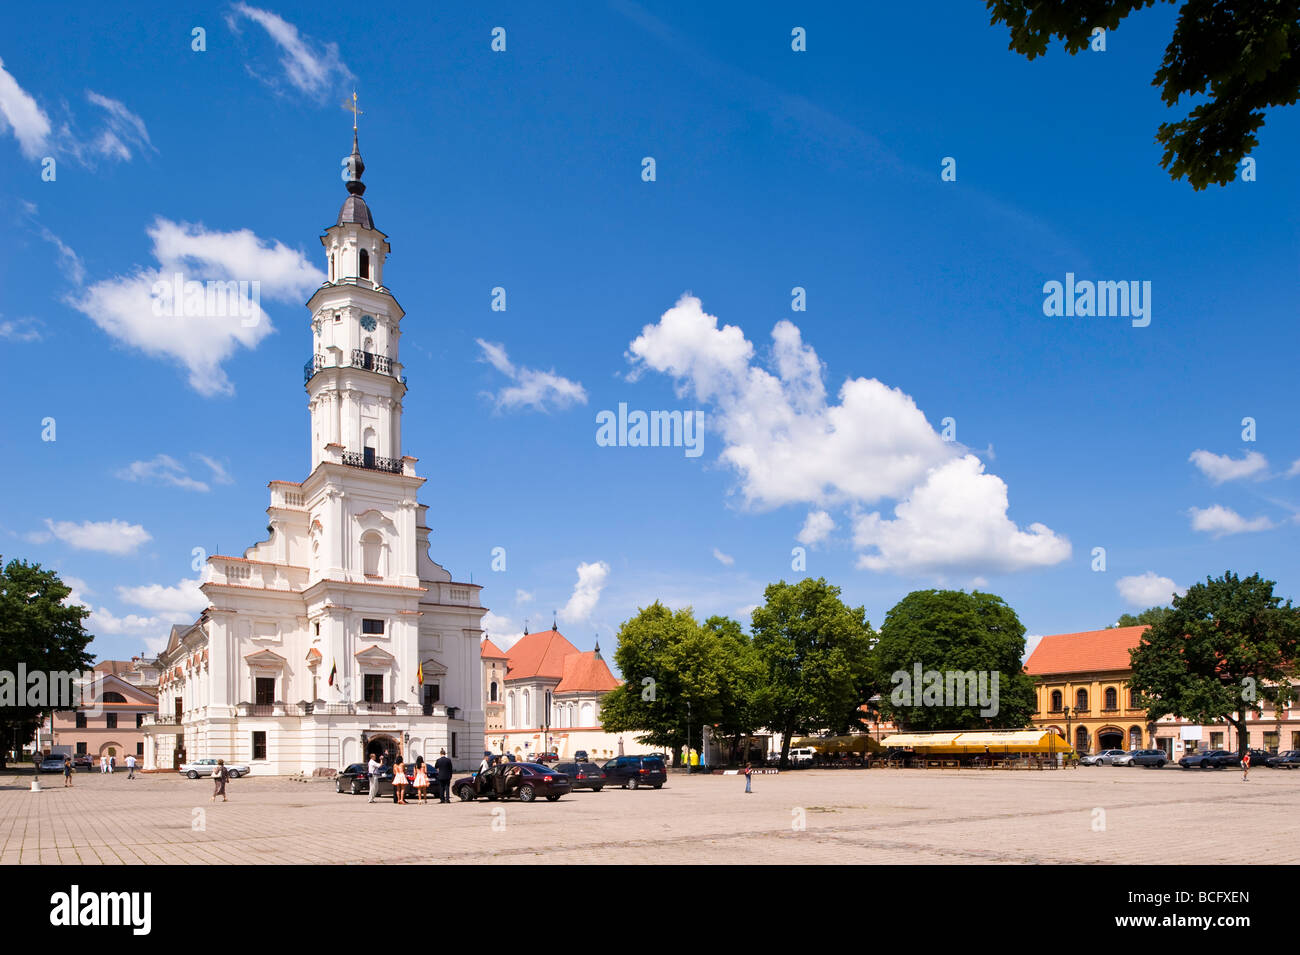 Town Hall Square Old Town Kaunas Lithuania Stock Photo